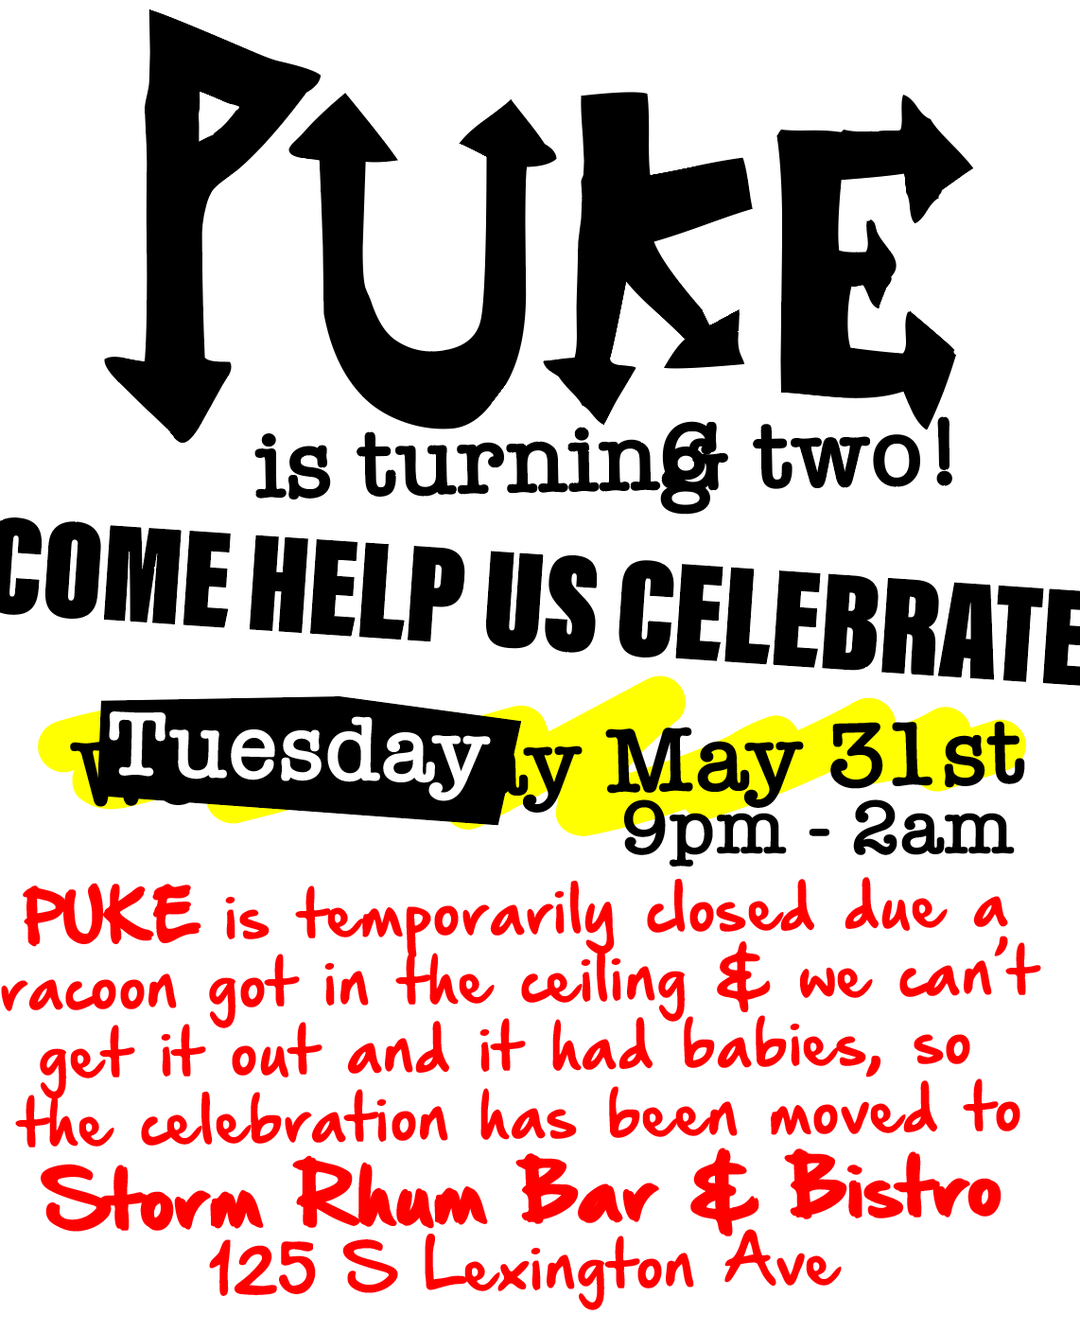 May be an image of text that says 'YUKE is turning two! COME HELP US CELEBRATI Tuesday Ly May 31st 9pm- 2am PUKE is temporarily closed due a acoon got in the ceiling $ we can't get it out and it had babies, so the celebration has been moved to Storm Rhum Bar も Bistvo 125 S Lexington Ave'